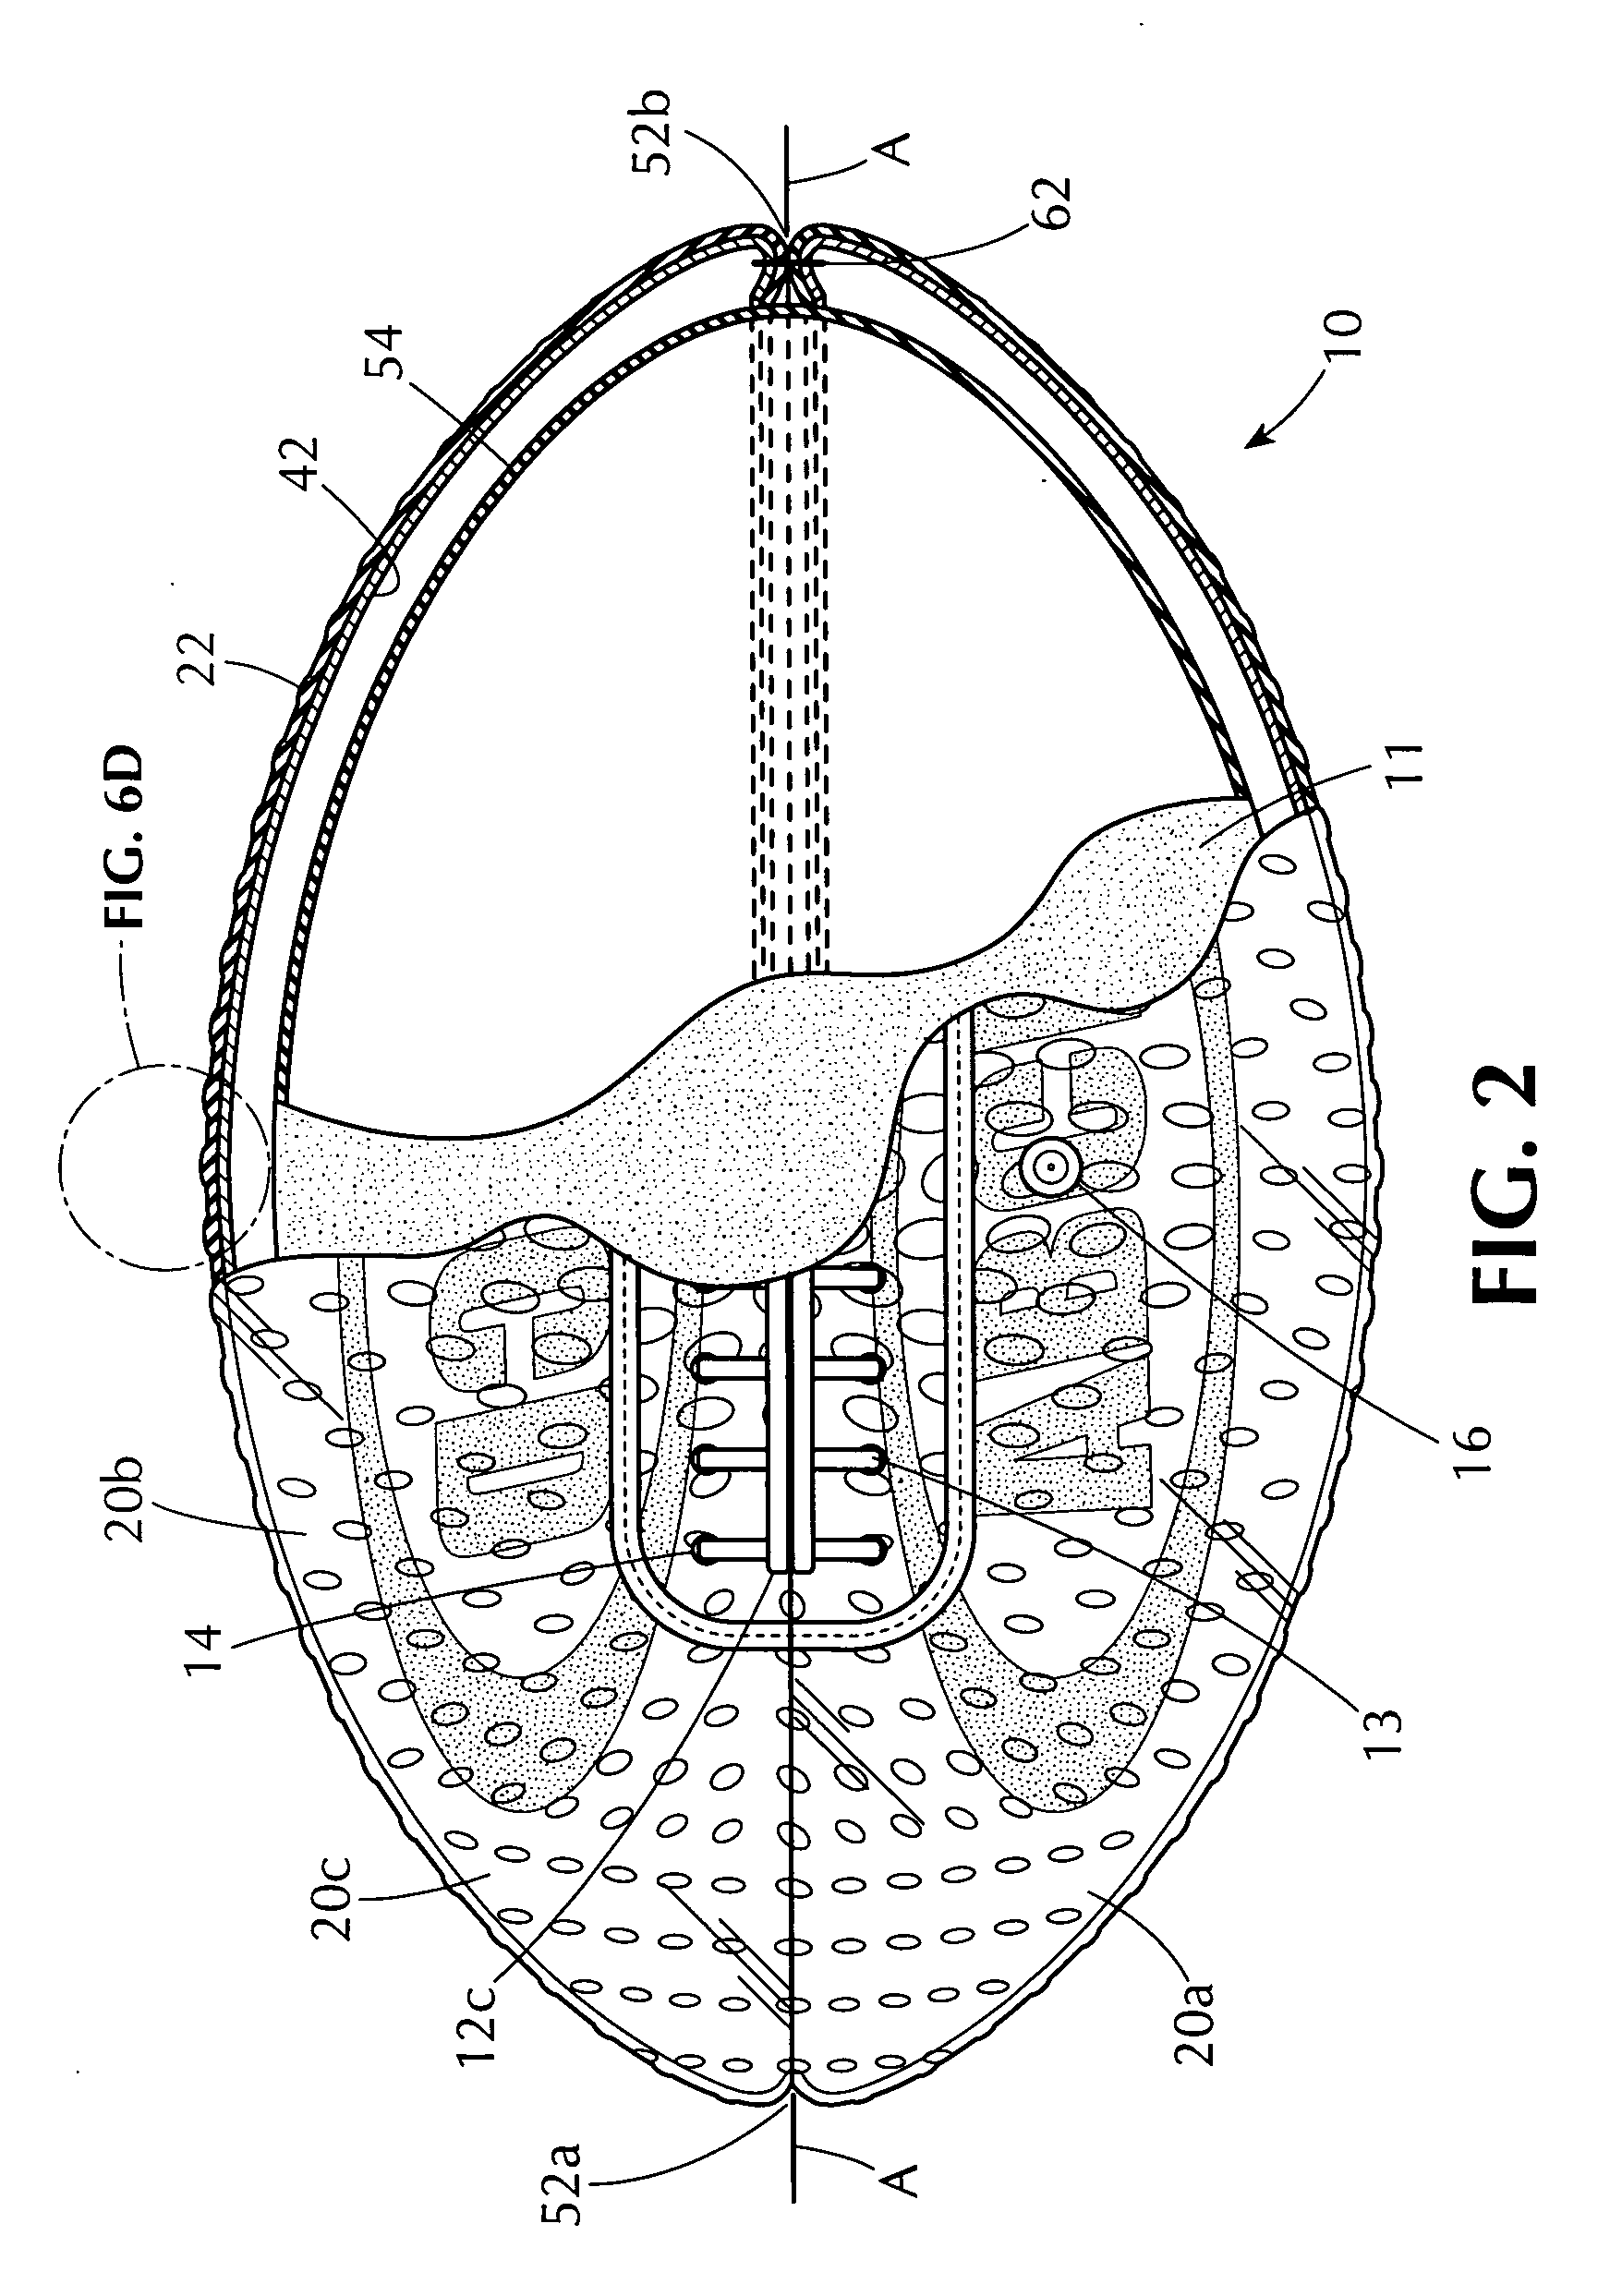 Novelty article with flexible and waterproof display carrying membrane